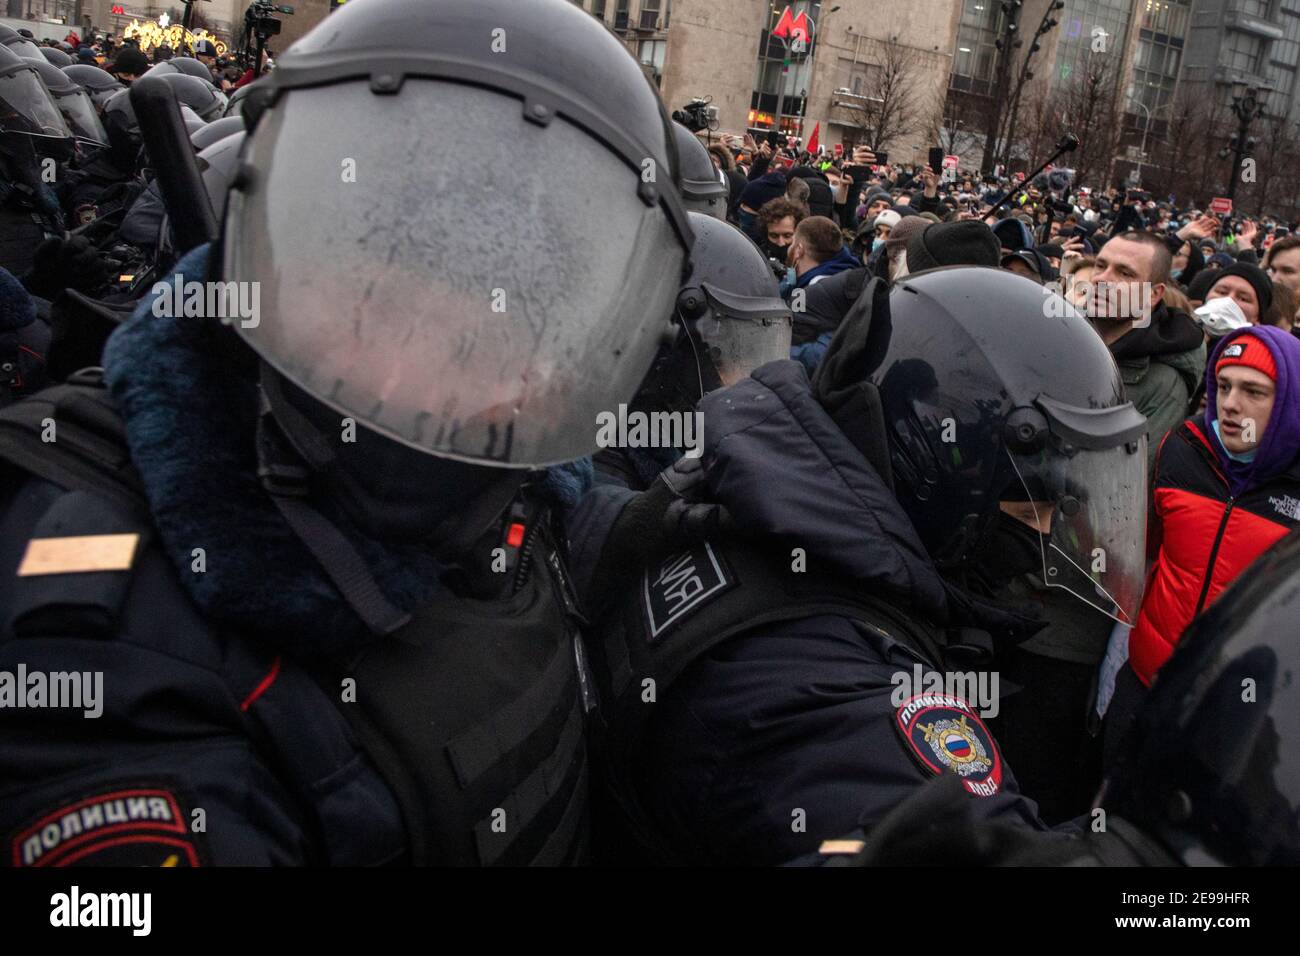 Moscow, Russia. 23rd of January, 2021 Riot police officers ensure law and order at an unsanctioned rally in support of Russian opposition leader Alexei Navalny at Pushkinskaya Square in Moscow, Russia Stock Photo